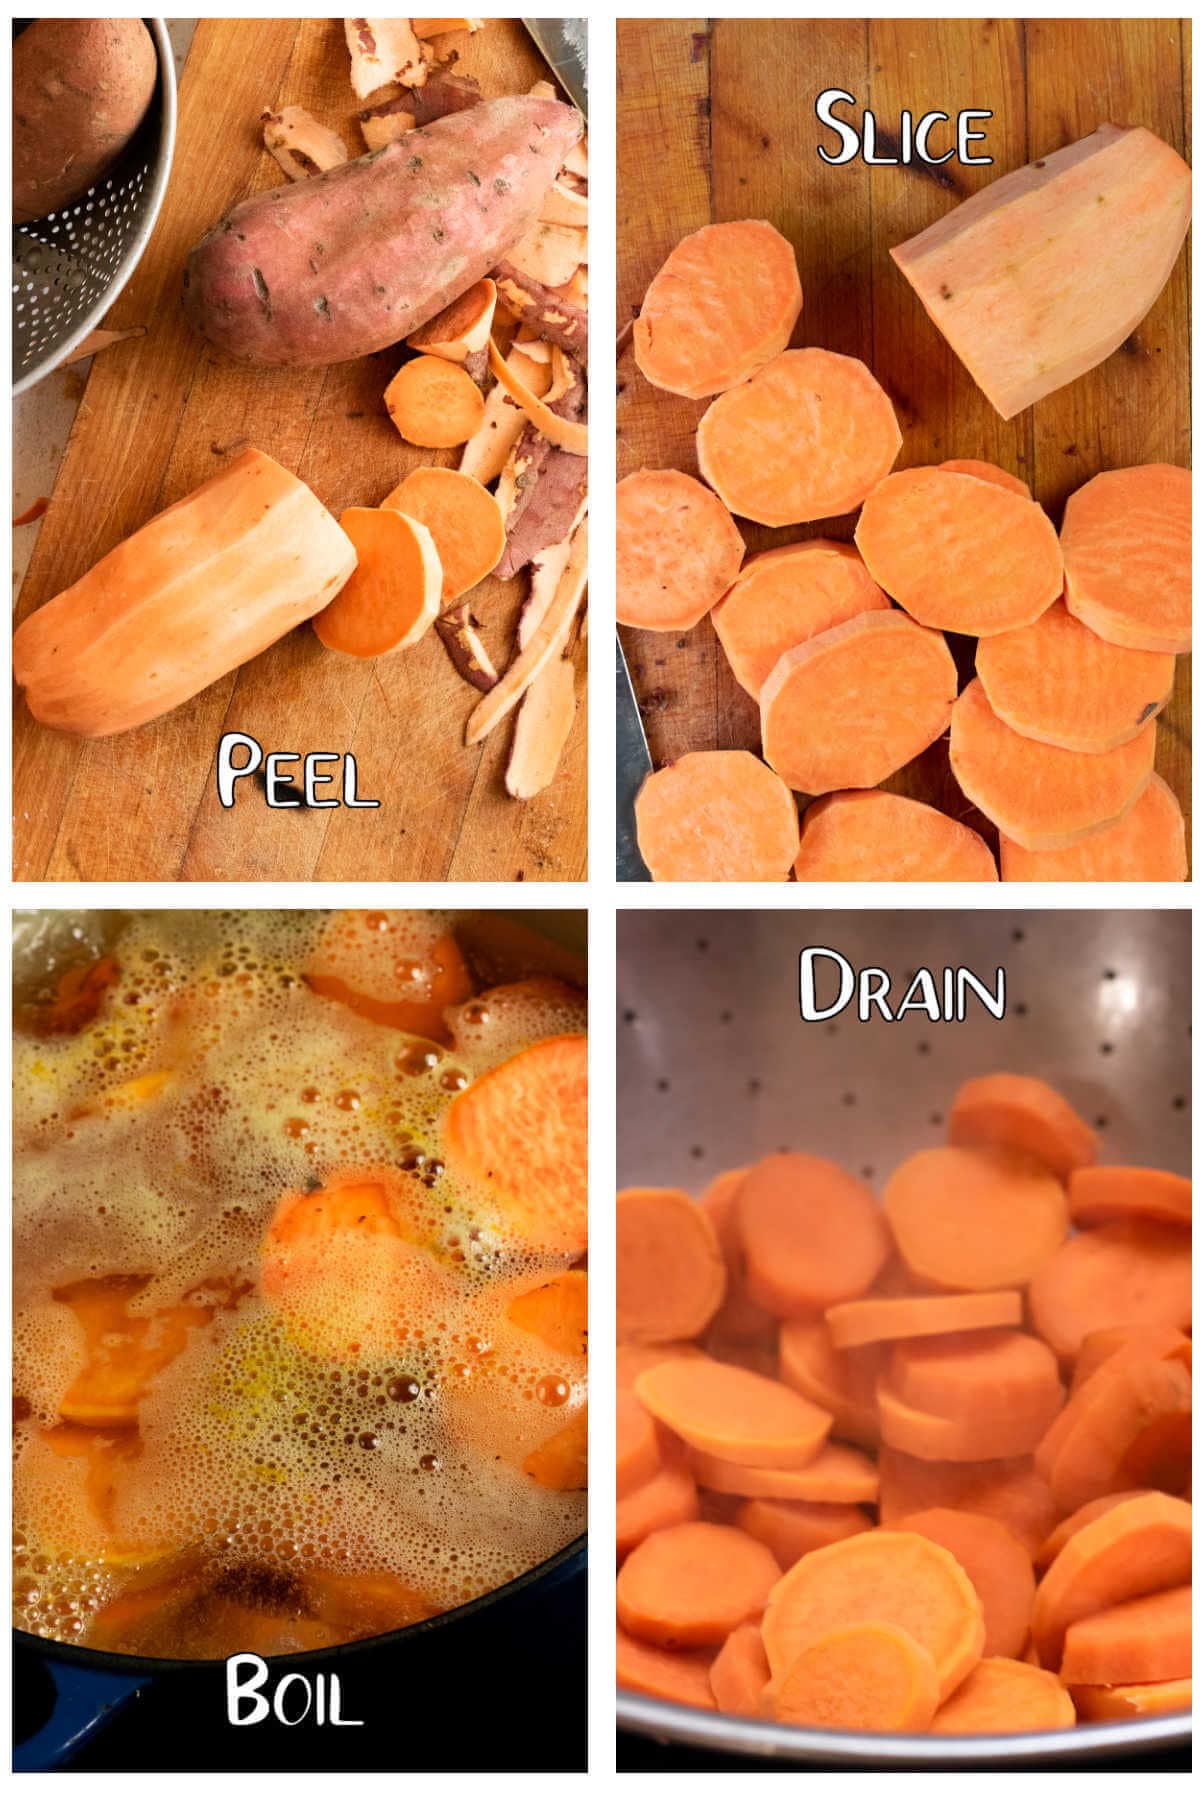 Photo Instructions showing how to peel, slice, boil and drain potatoes.